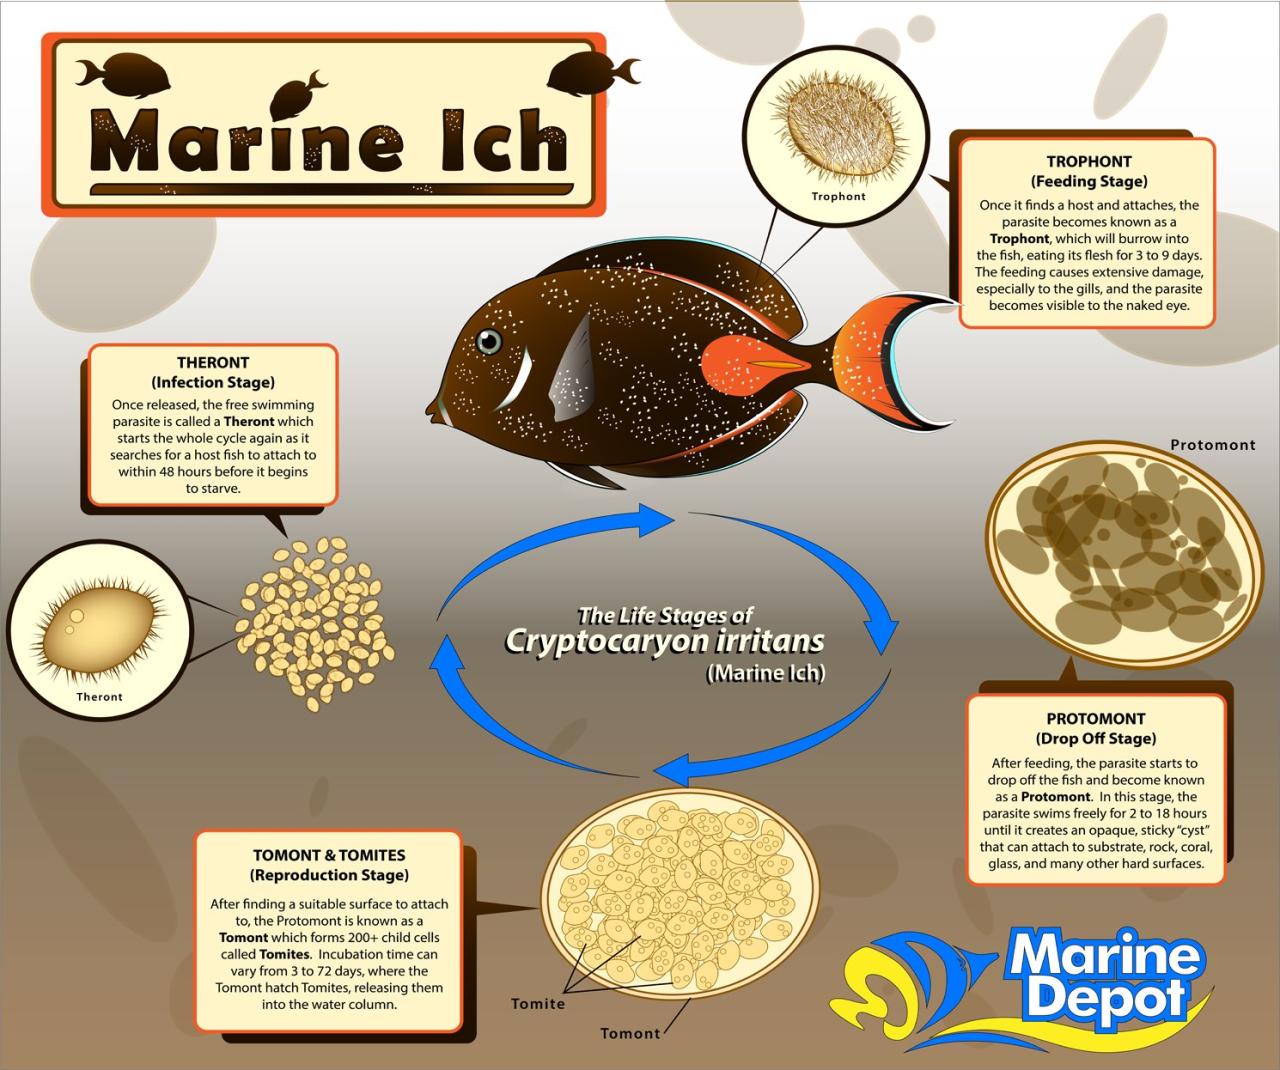 How To Get Rid Of Marine Ich